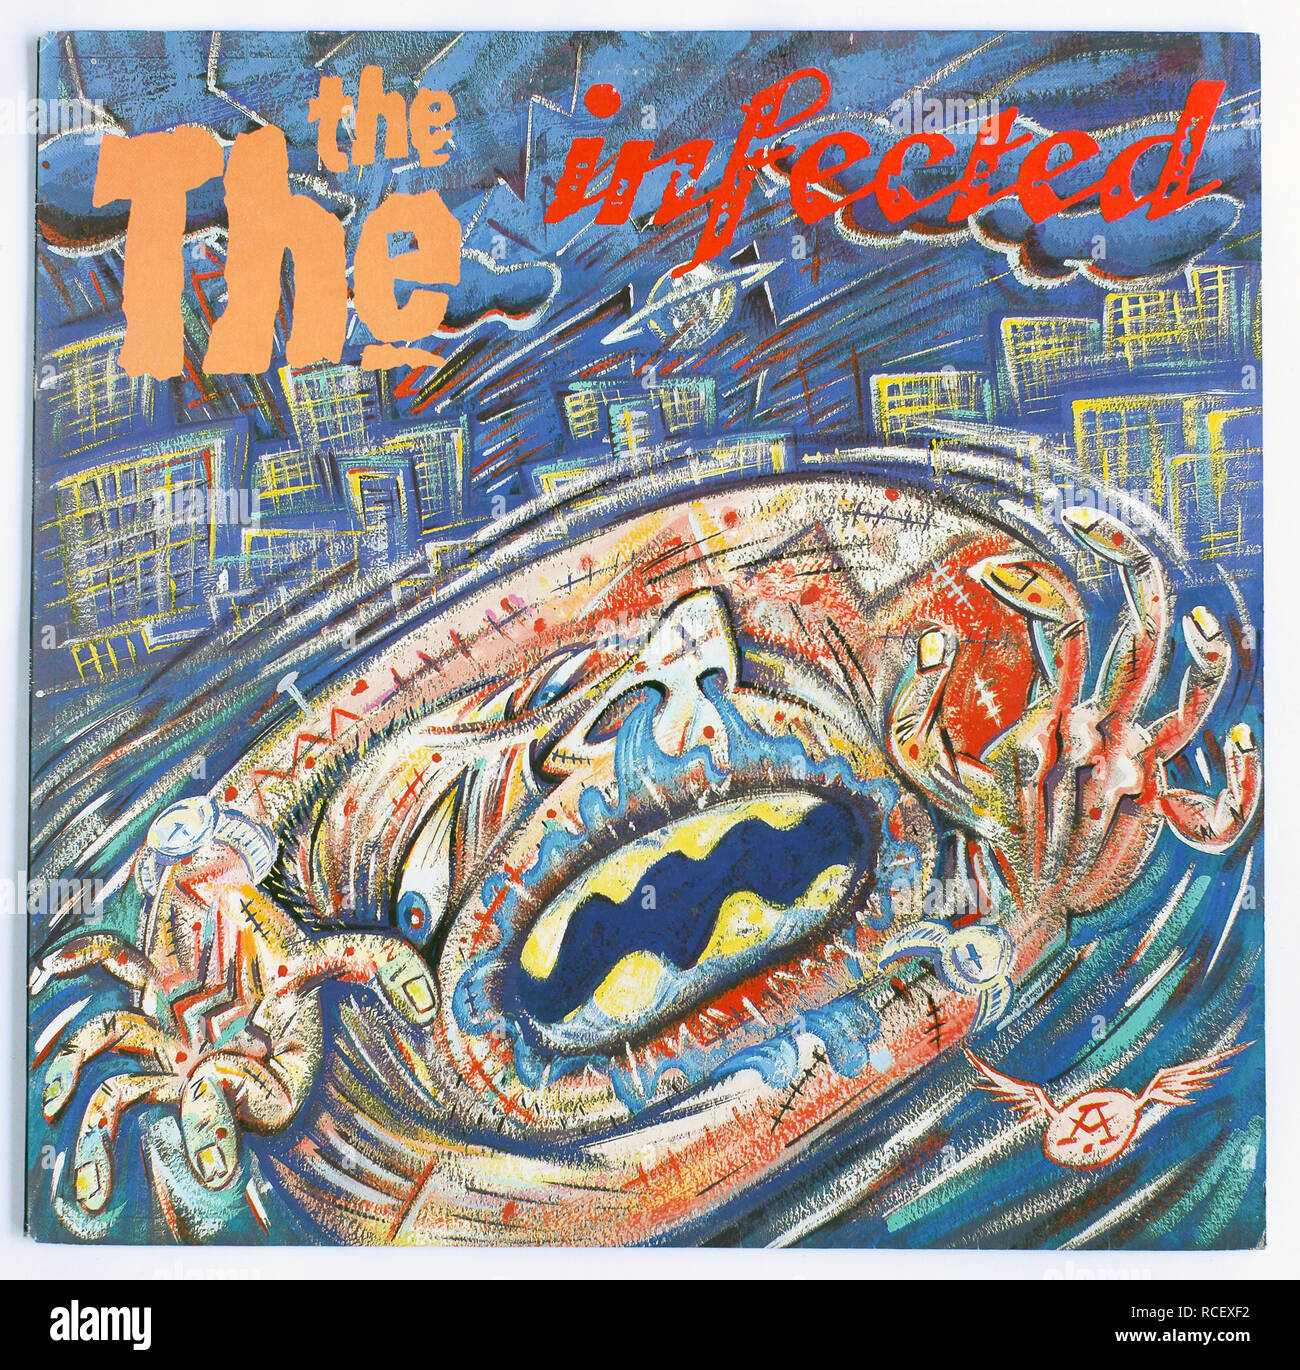 The cover of Infected by The The. 1986 album on Some Bizarre/Epic Records - Editorial use only Stock Photo